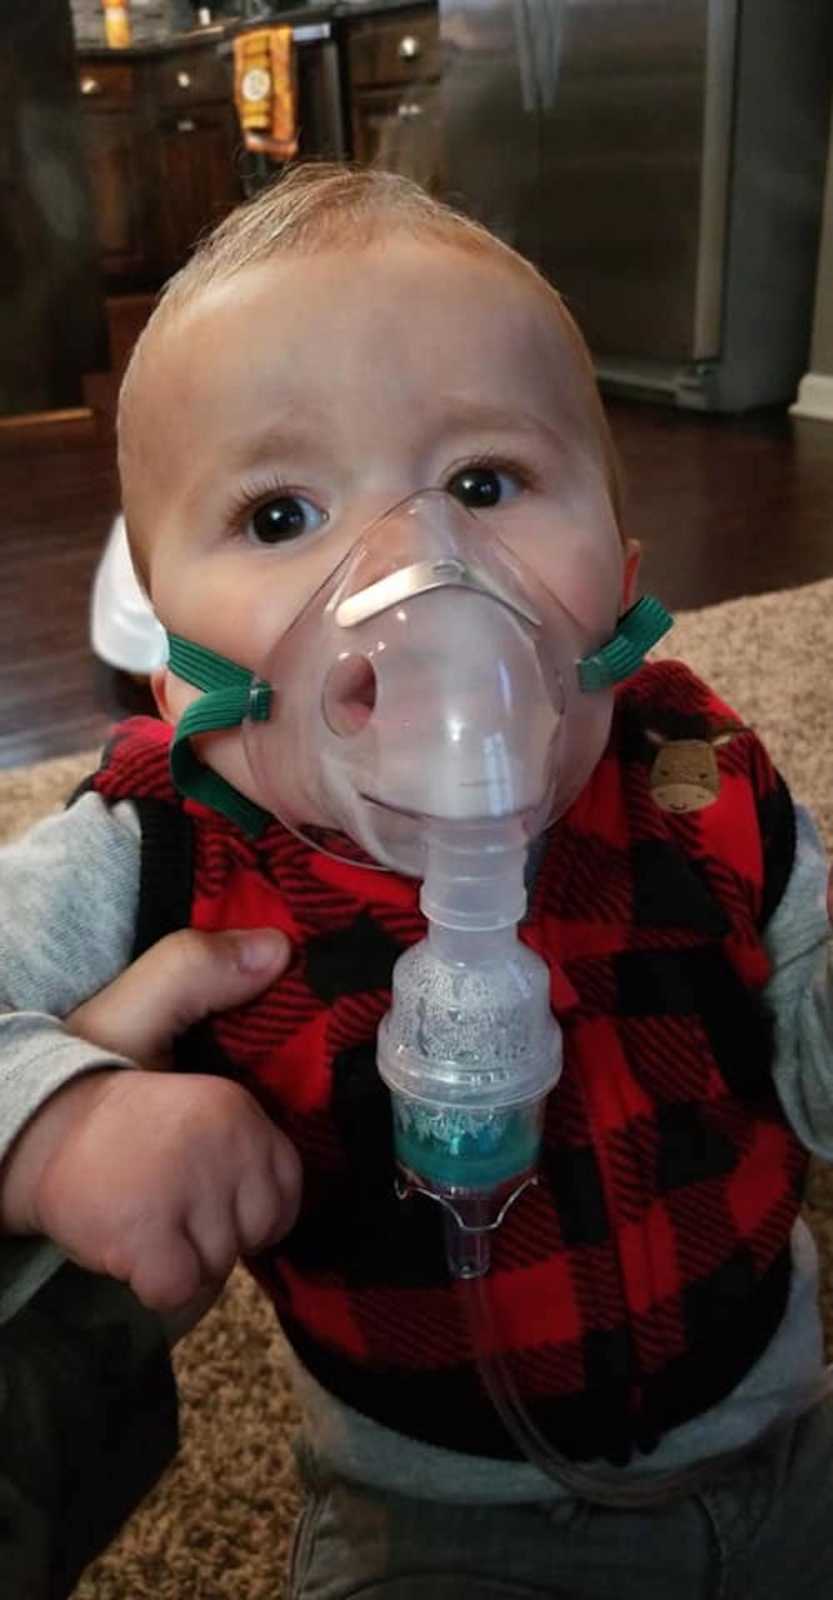 Little boy who had RSV and bronchitis sits at home with oxygen mask on